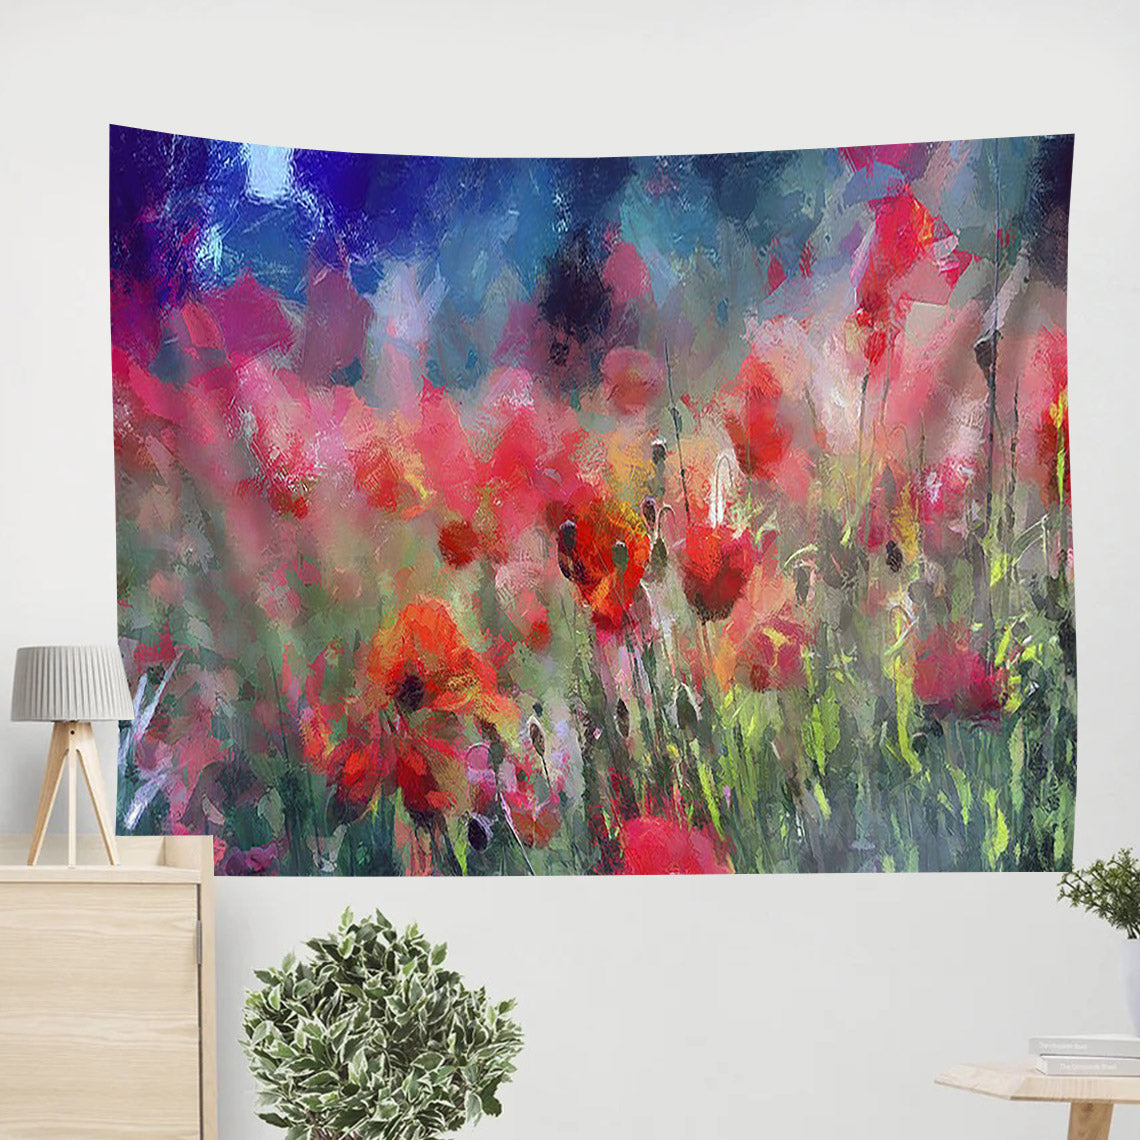 Red Poppies Field Painting Tapestry 1 - Tapestry Wall Decor - Home Decor Living Room